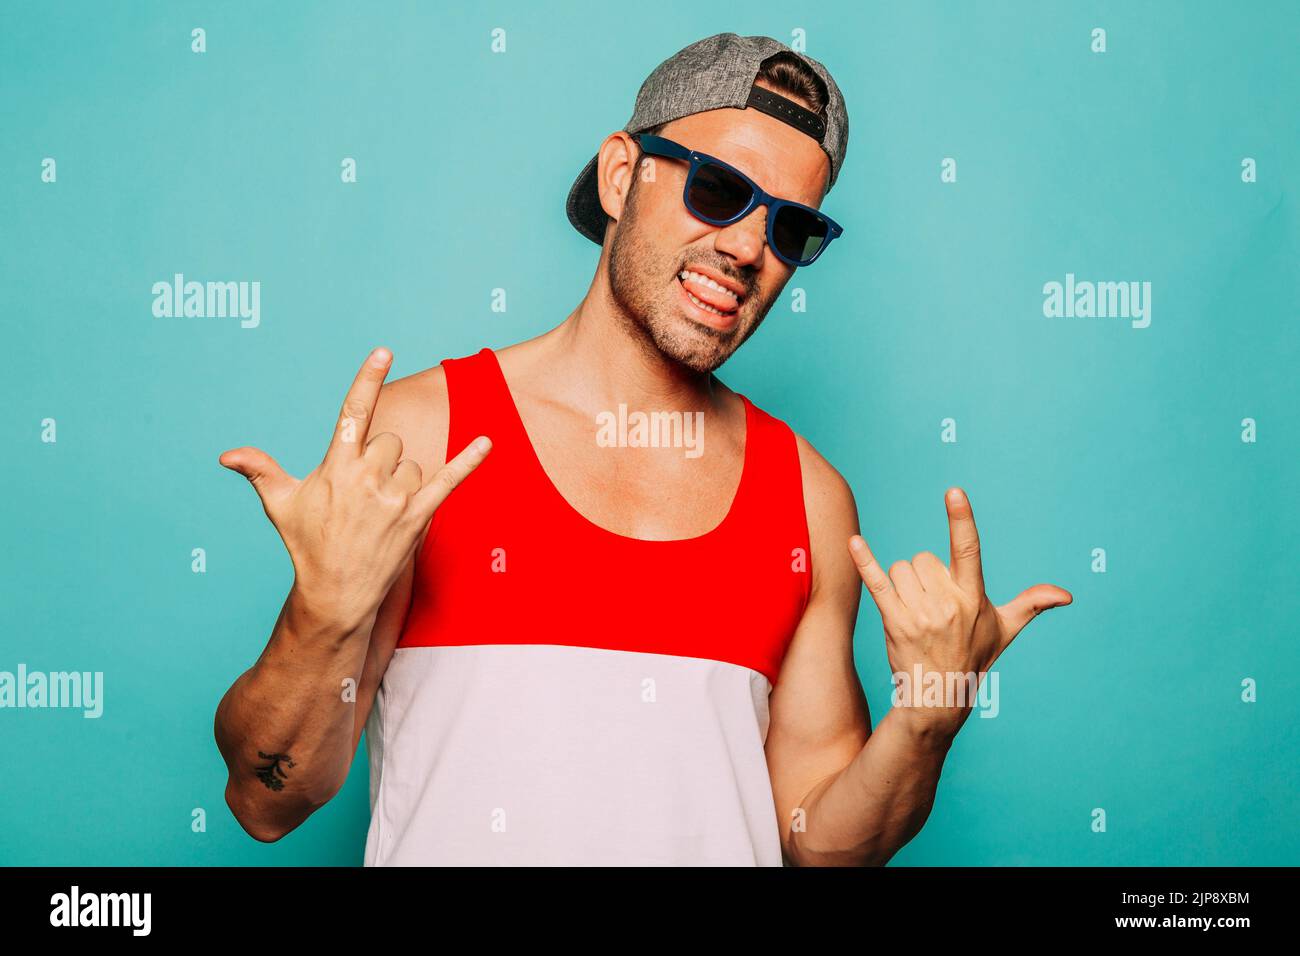 self confident, sticking out tongue, mano cornuta, rock and roll, self confidents, poking tongues, sticking out tongues Stock Photo